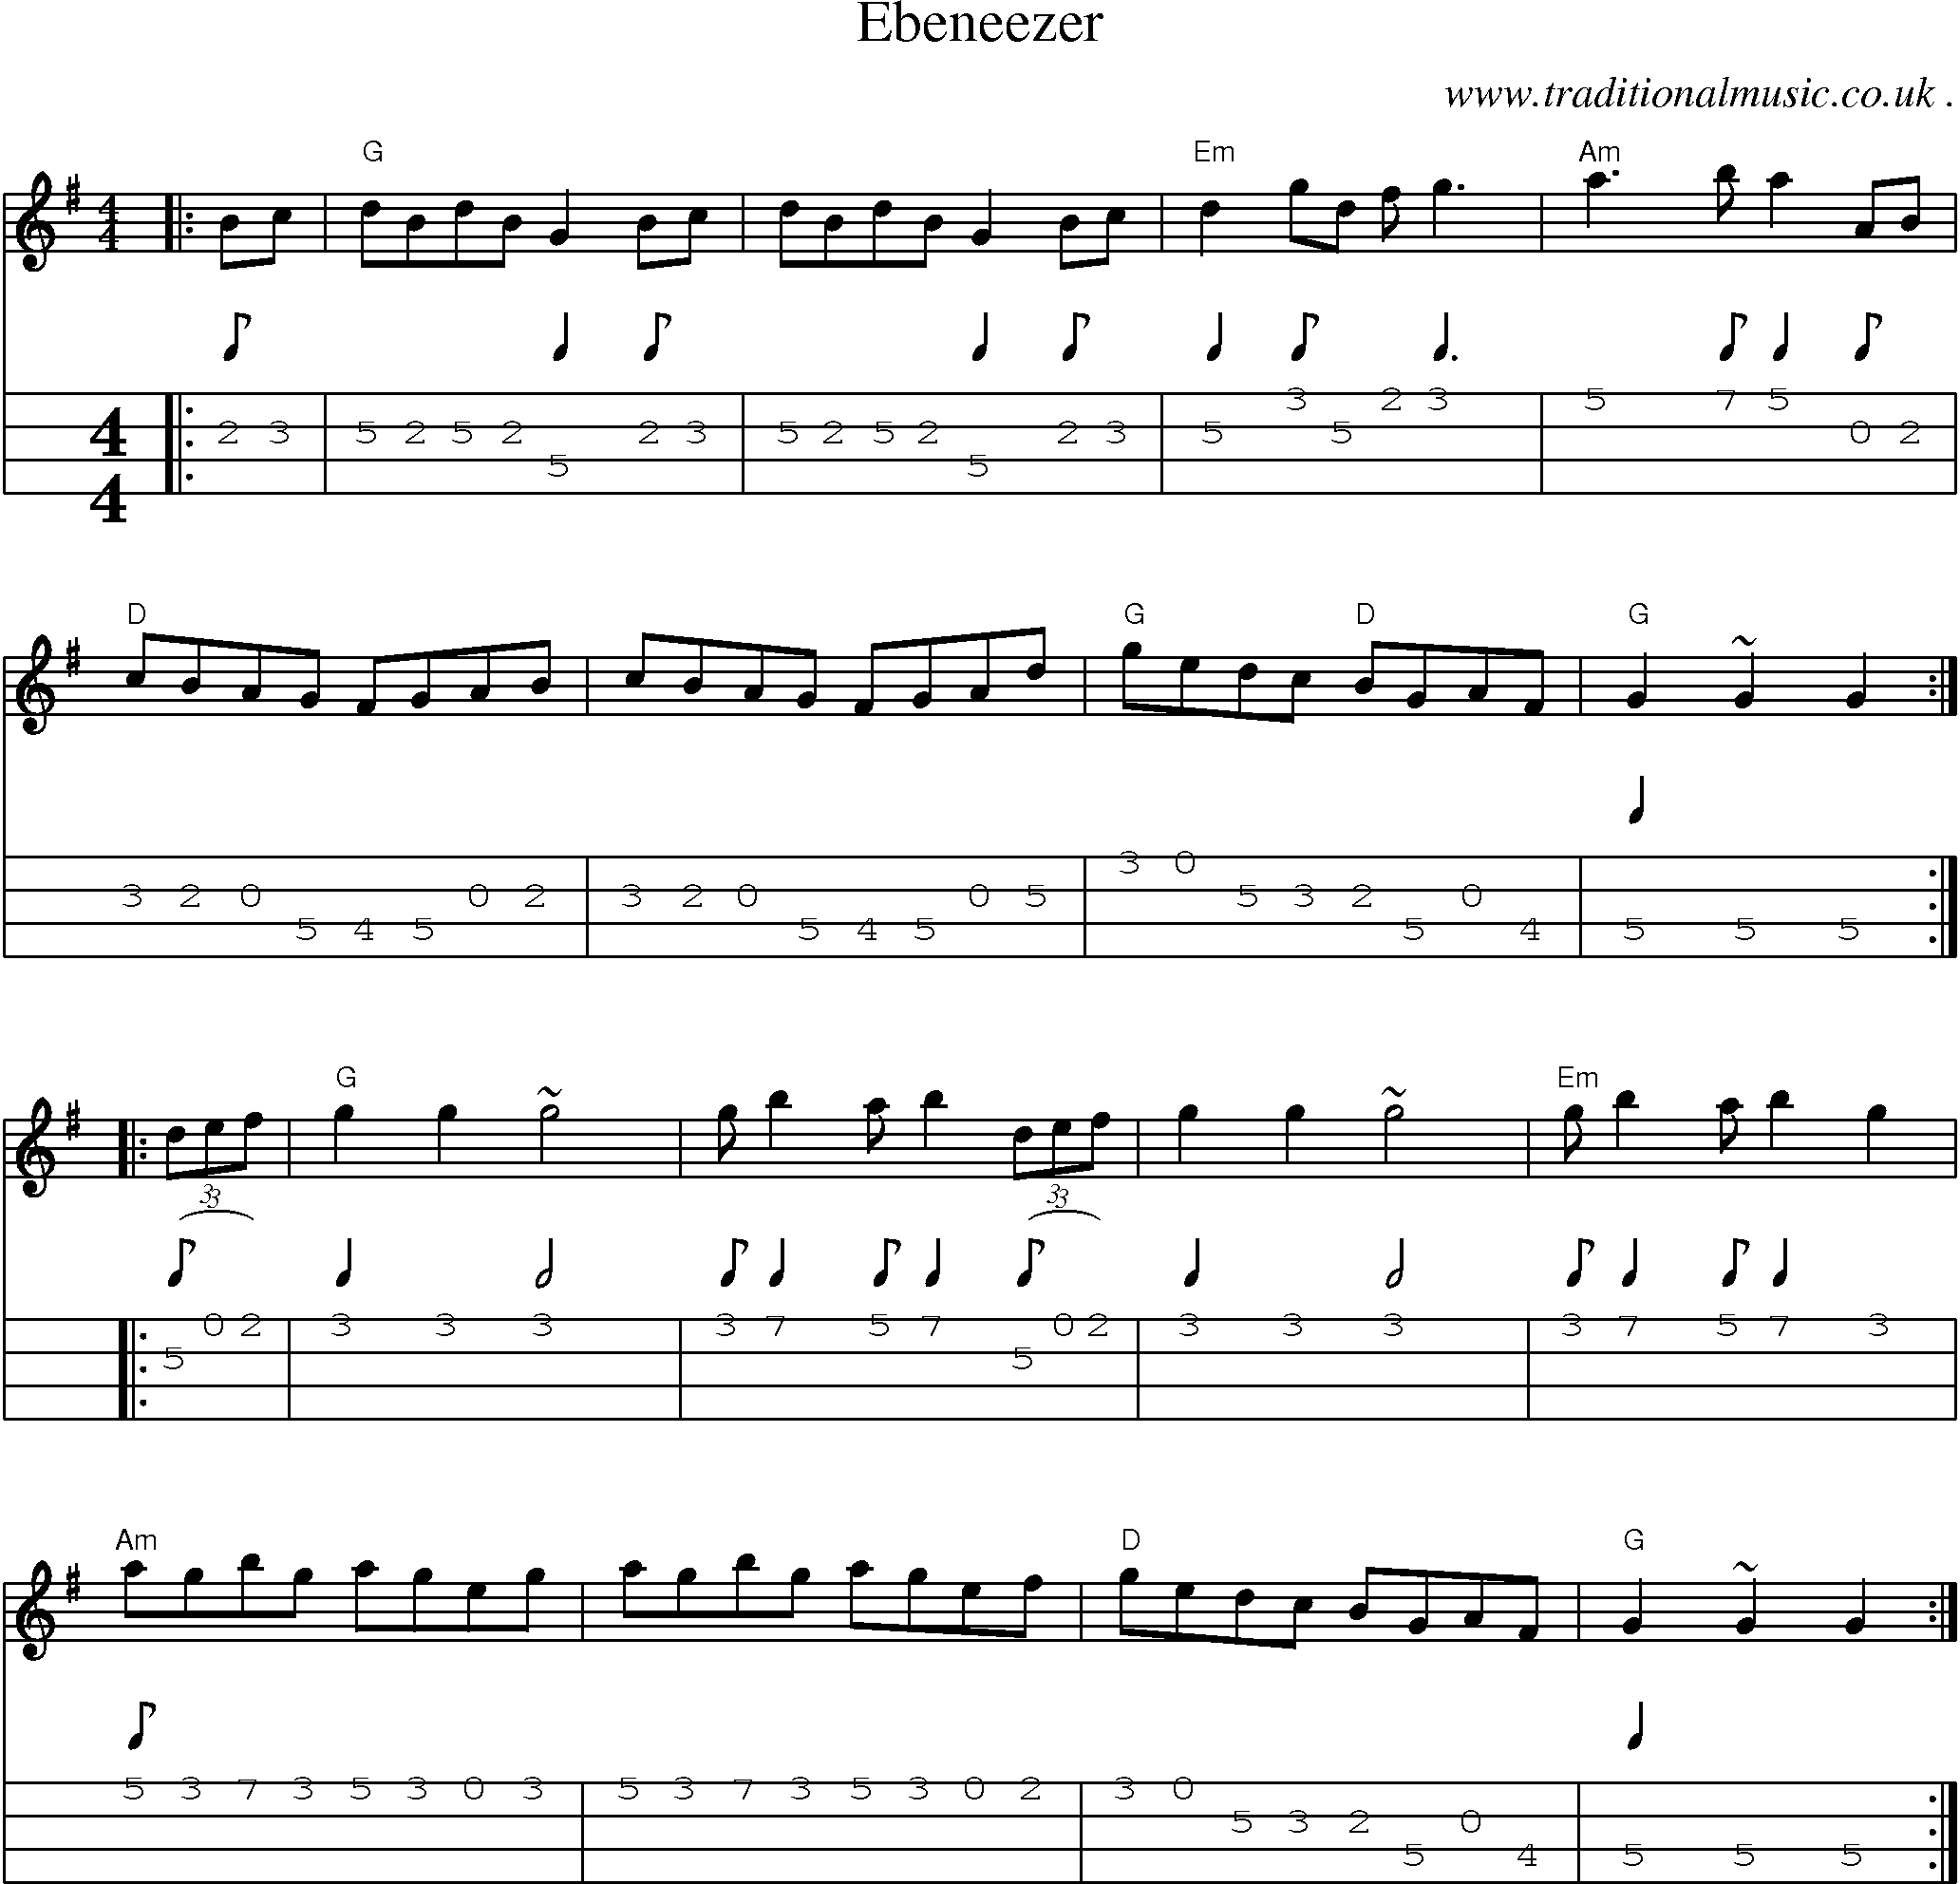 Music Score and Guitar Tabs for Ebeneezer